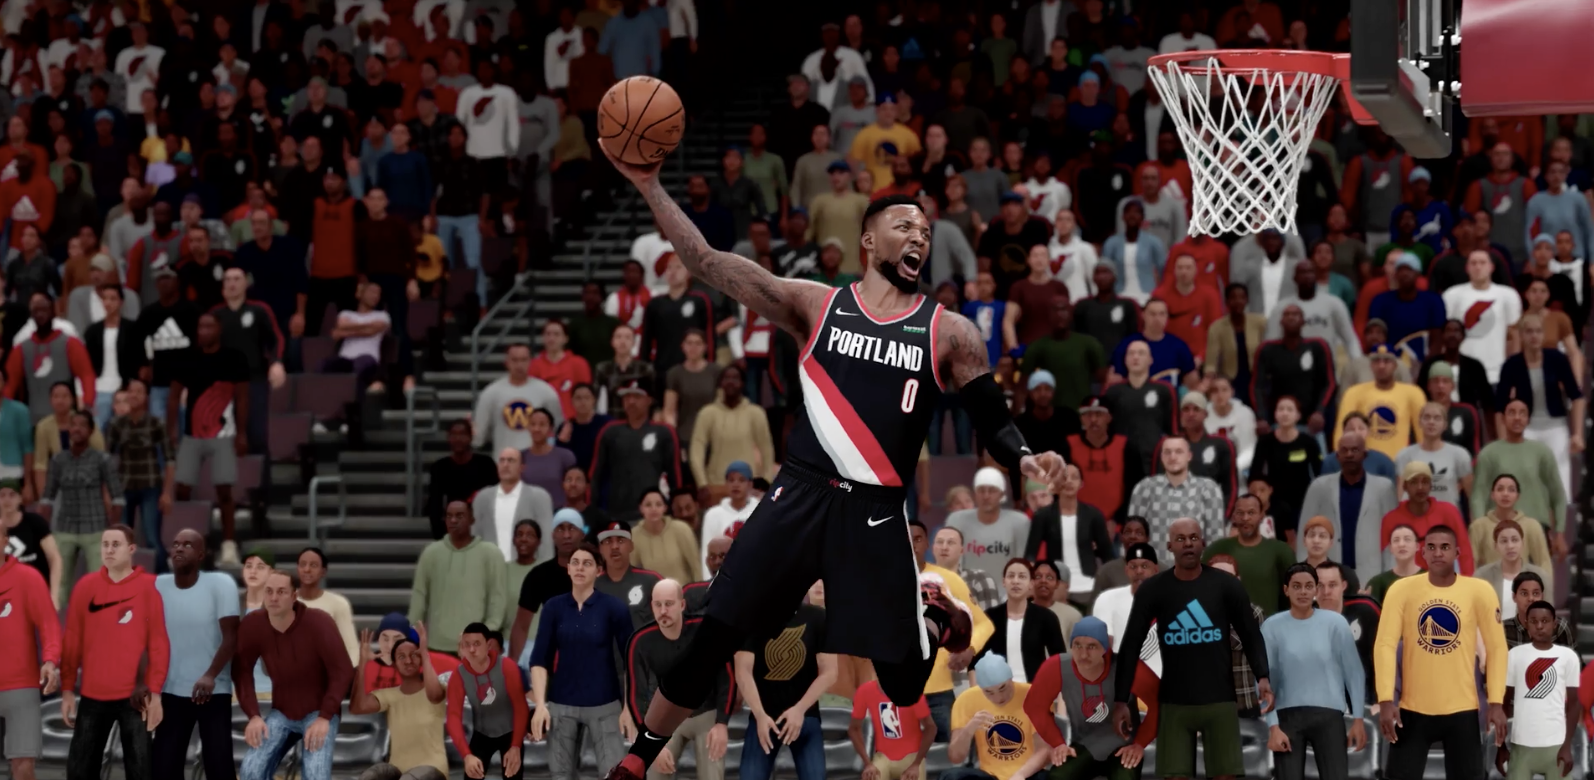 NBA 2K21 pre-order guide: Mamba Forever Edition, next-gen versions